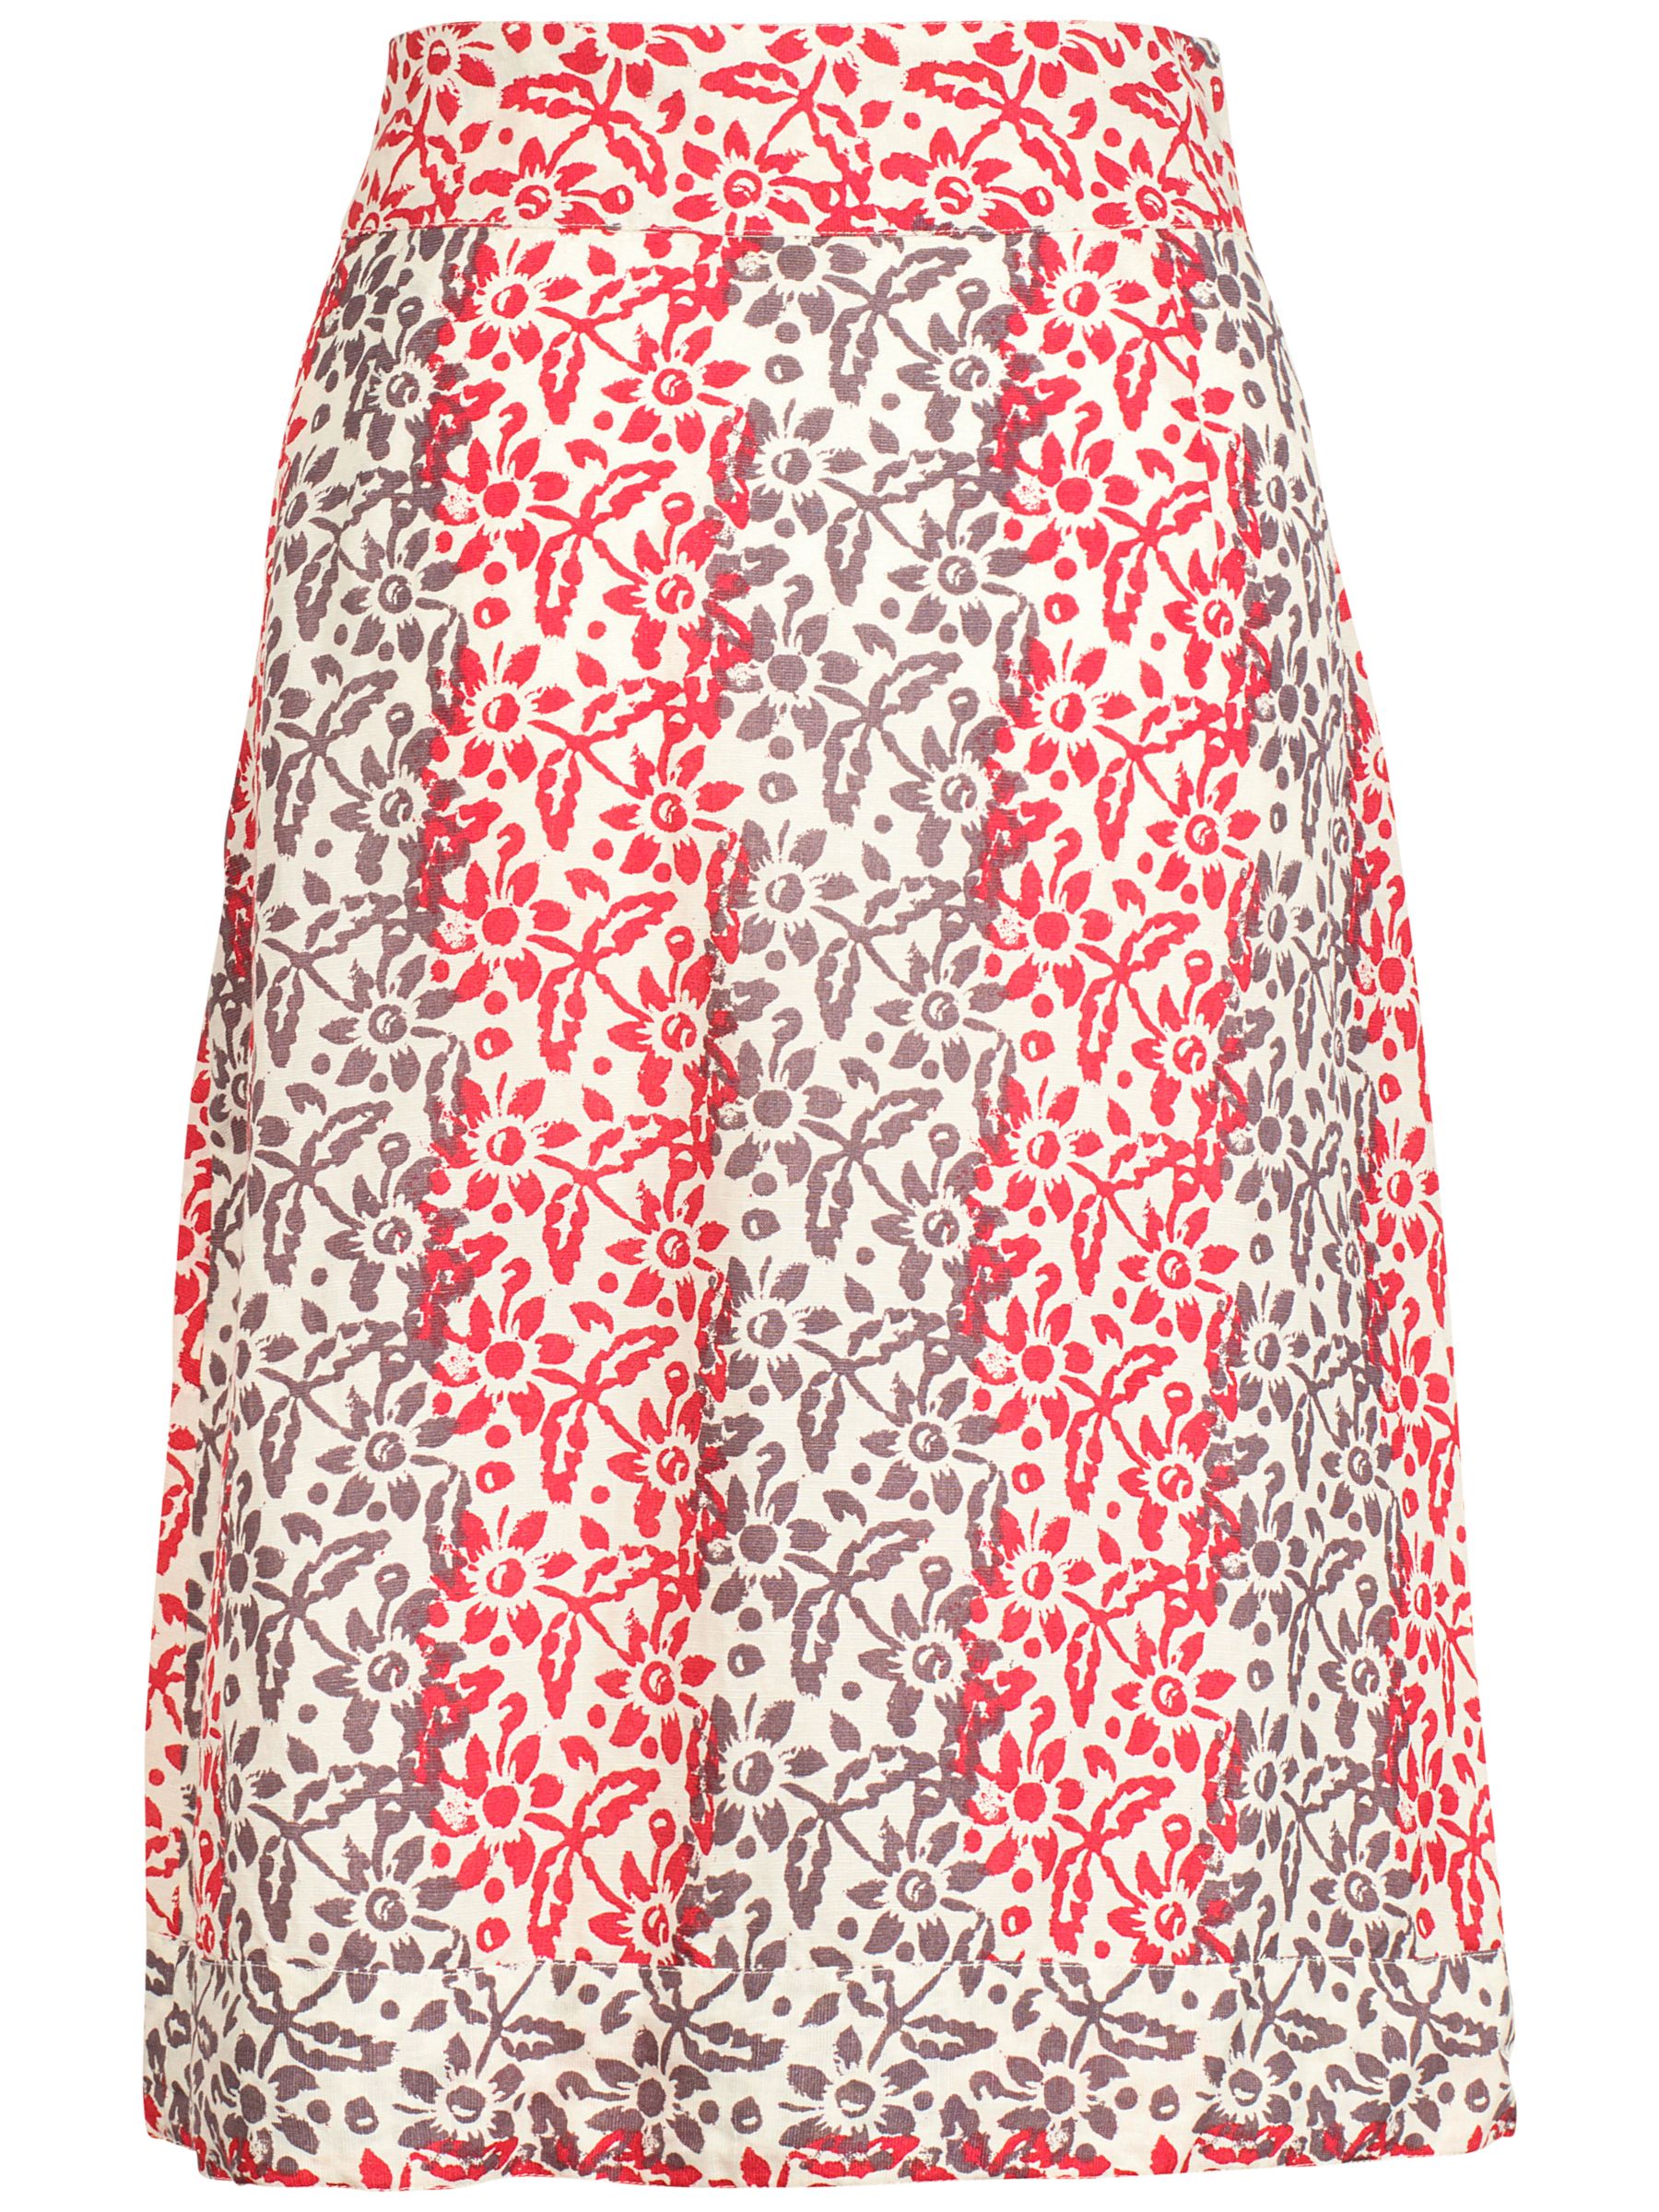 Fat Face Casey Patchwork A-Line Skirt, Ivory/Red